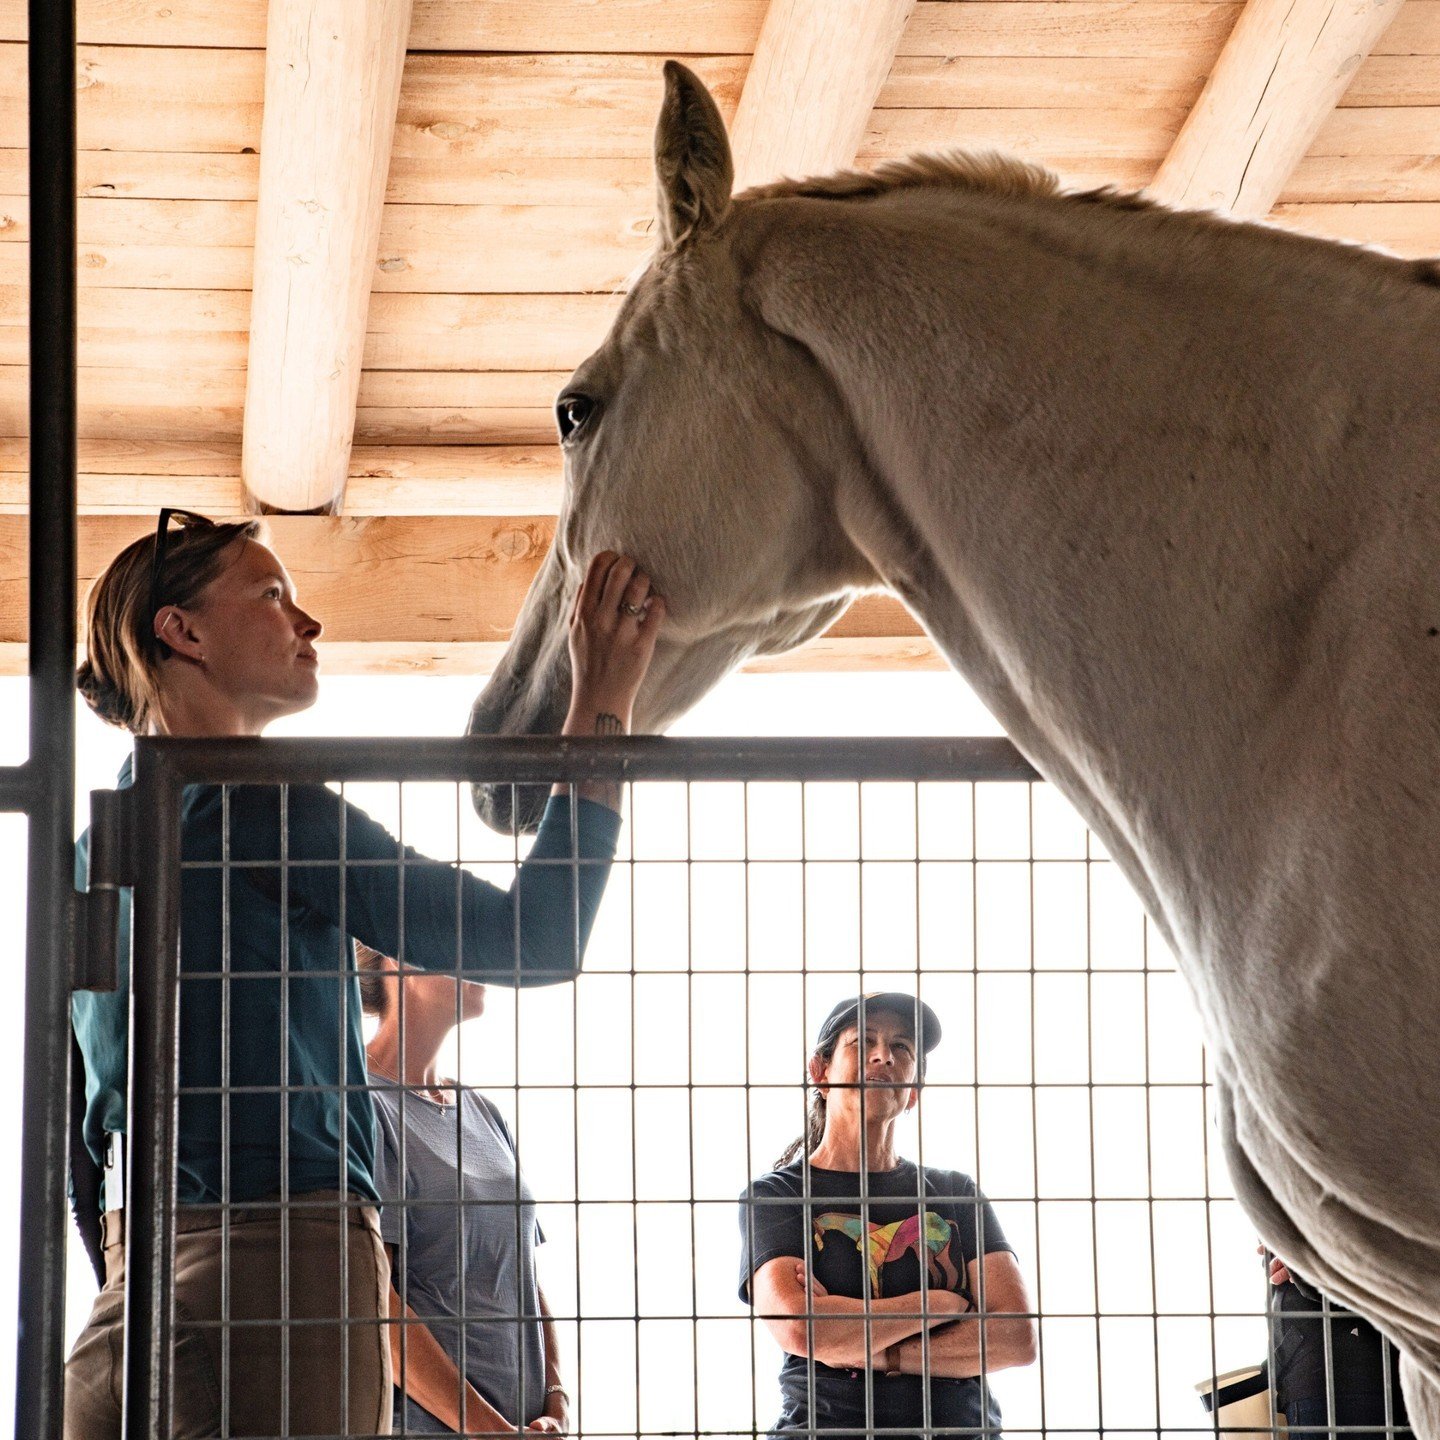 Building a bond with your equine partner is one of the key foundations for any equestrian, no matter what your goal is, ridden or non-ridden. 

We'd love to hear from you in the comments, what have you found to be the most effective methods to build 